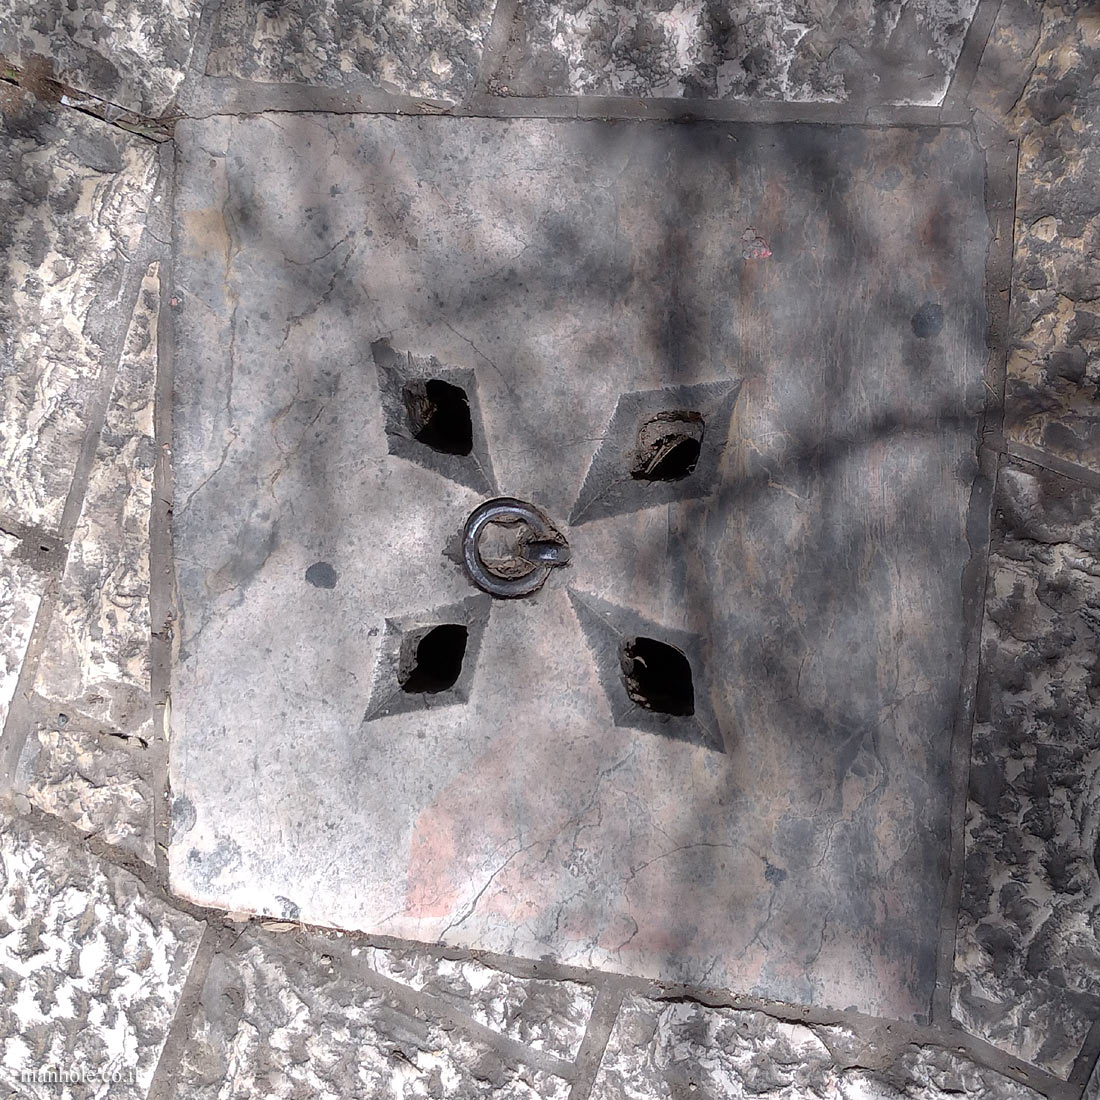 Jerusalem - Old City - Drainage cover with holes in the shape of a diamond and a lifting handle